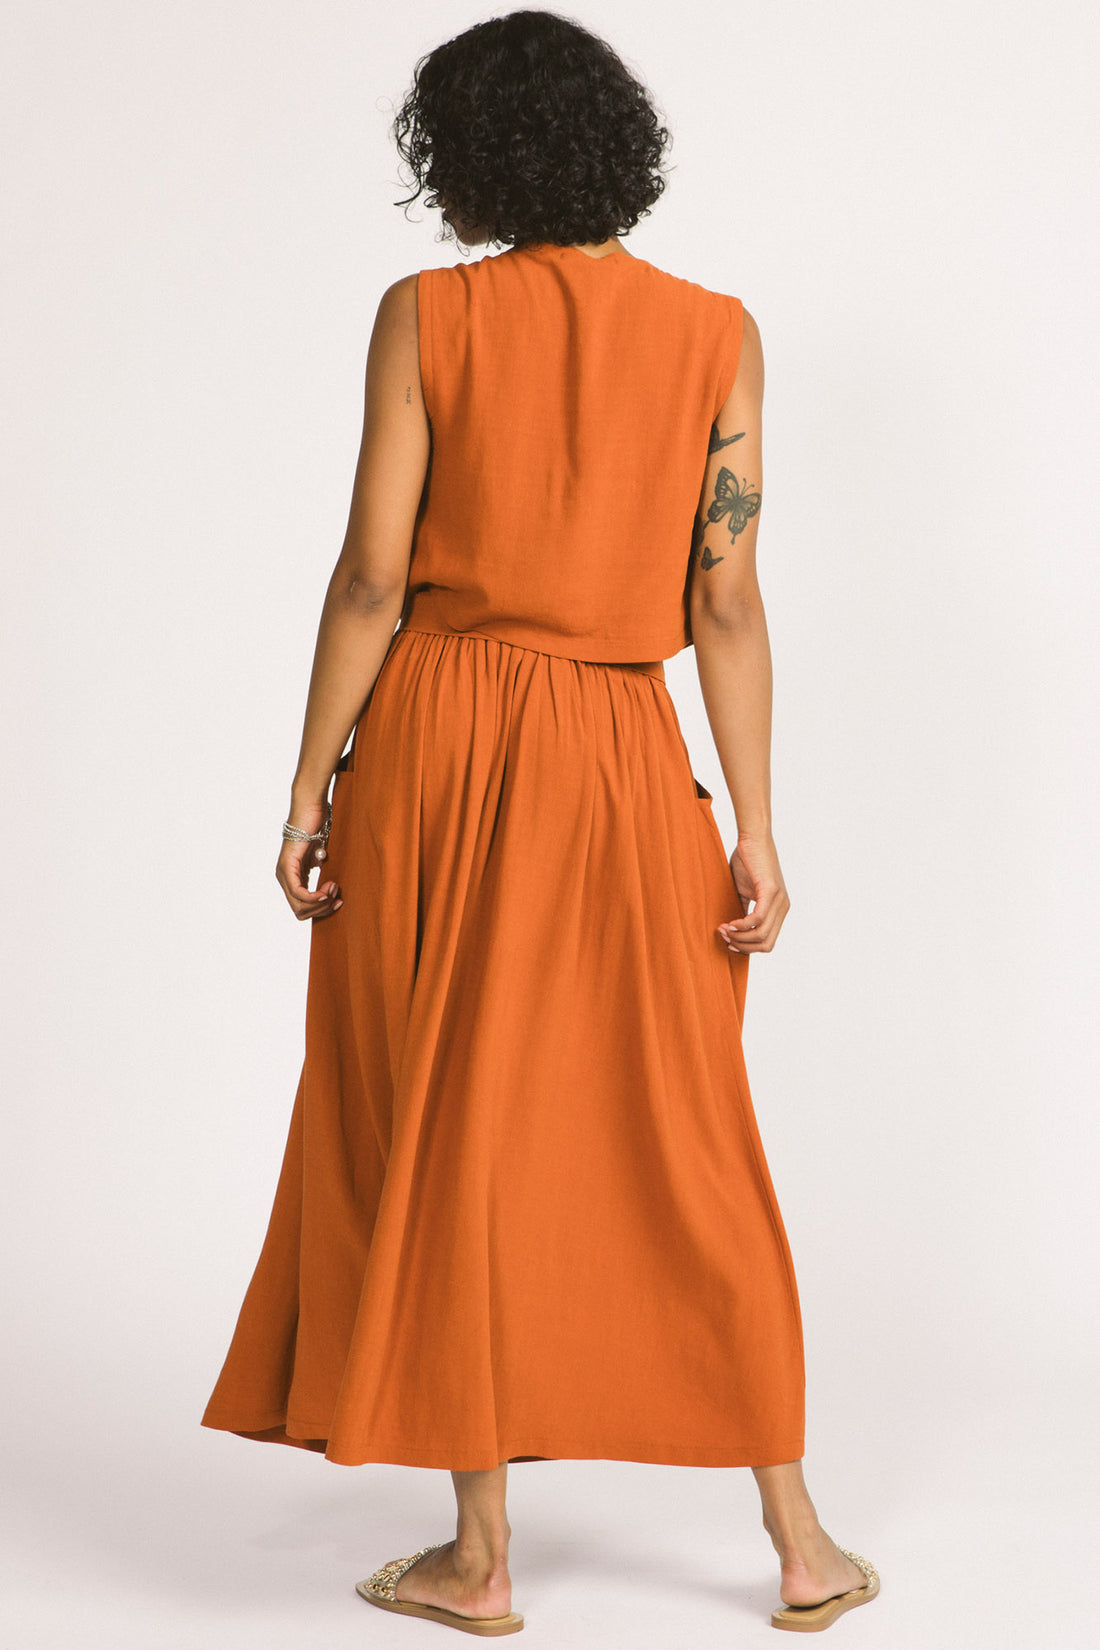 Oriana Skirt by Allison Wonderland, Rust, back view, full maxi skirt, elastic waist, removable belt with beads, pockets, eco-fabric, viscose/linen, sizes 2-12, made in Vancouver